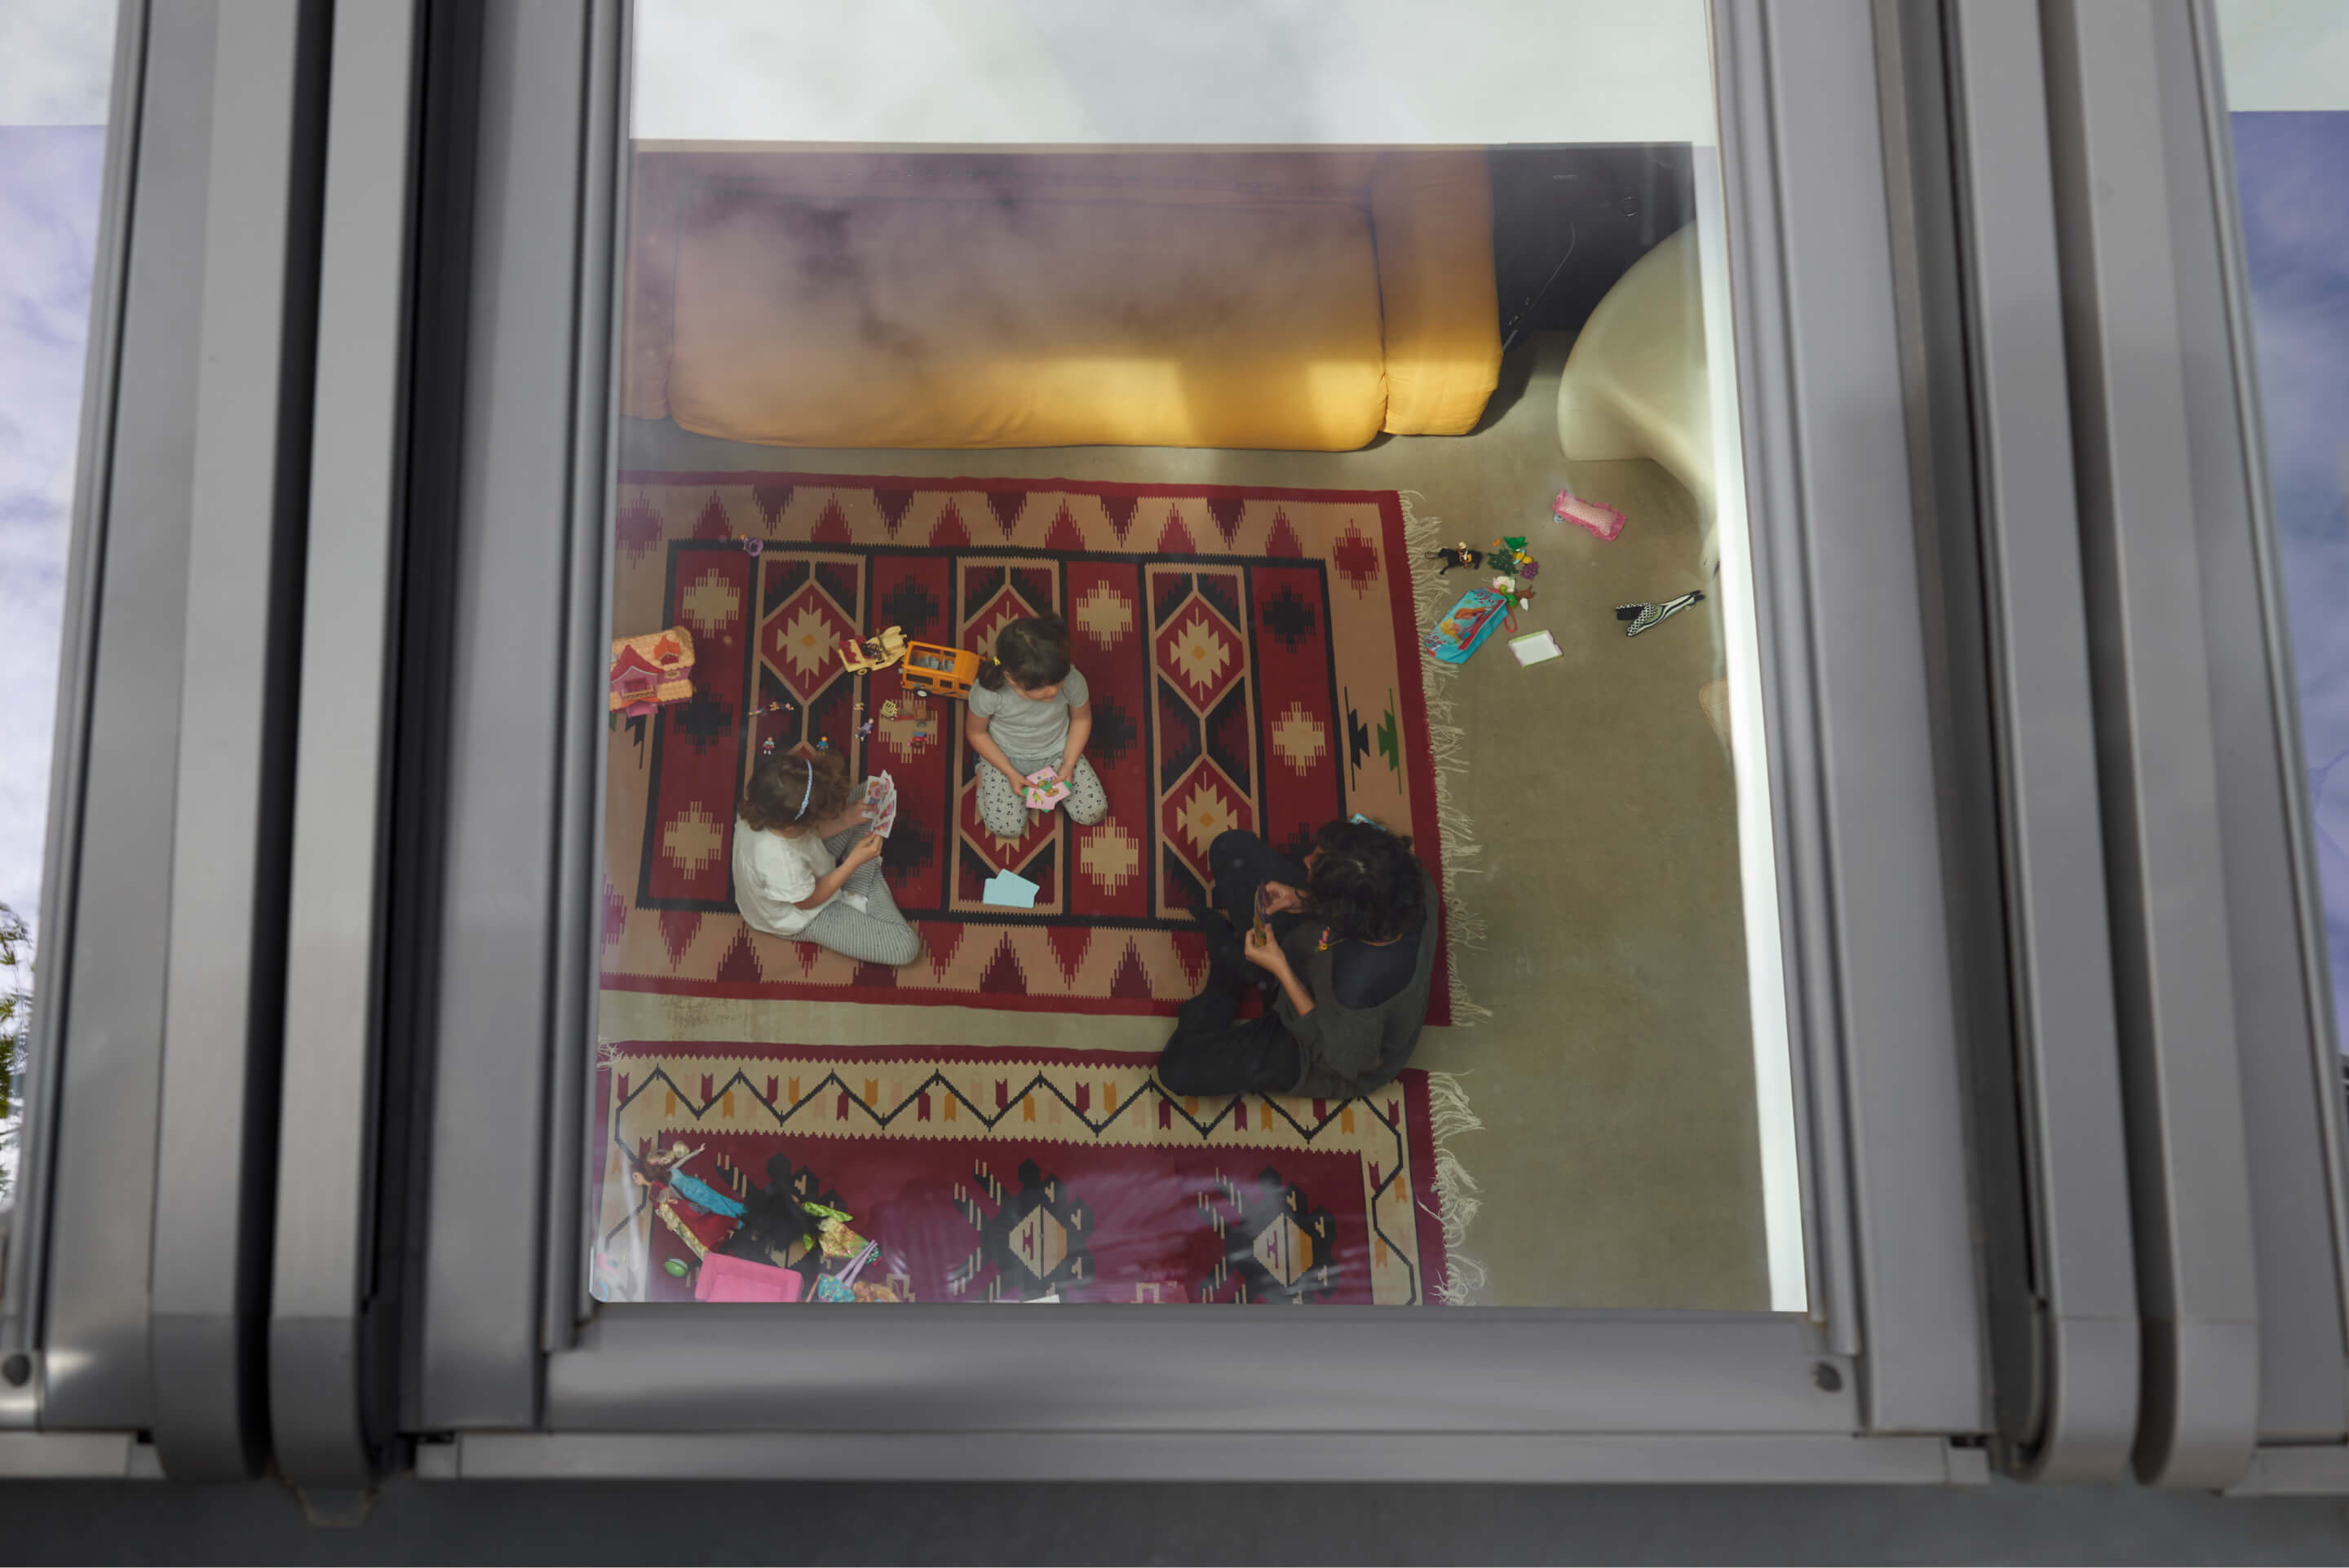 A room through a roof window with a family sitting and playing on a carpet